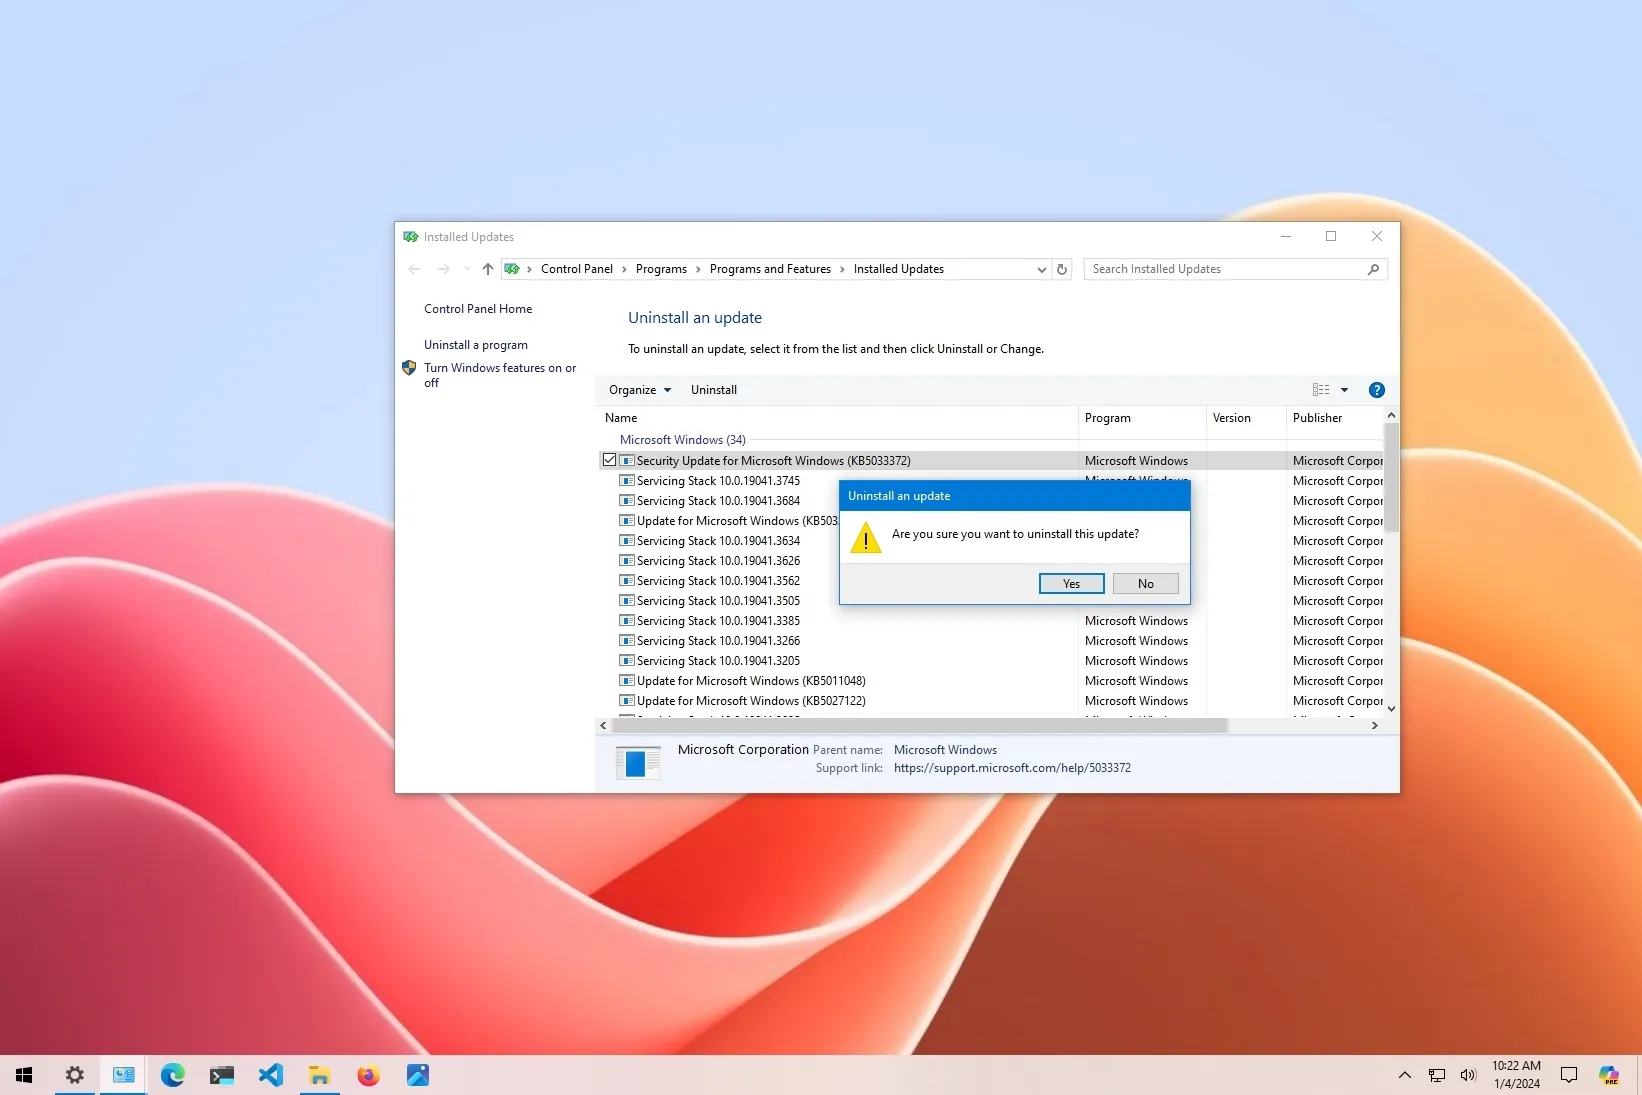 How to uninstall updates on Windows 10